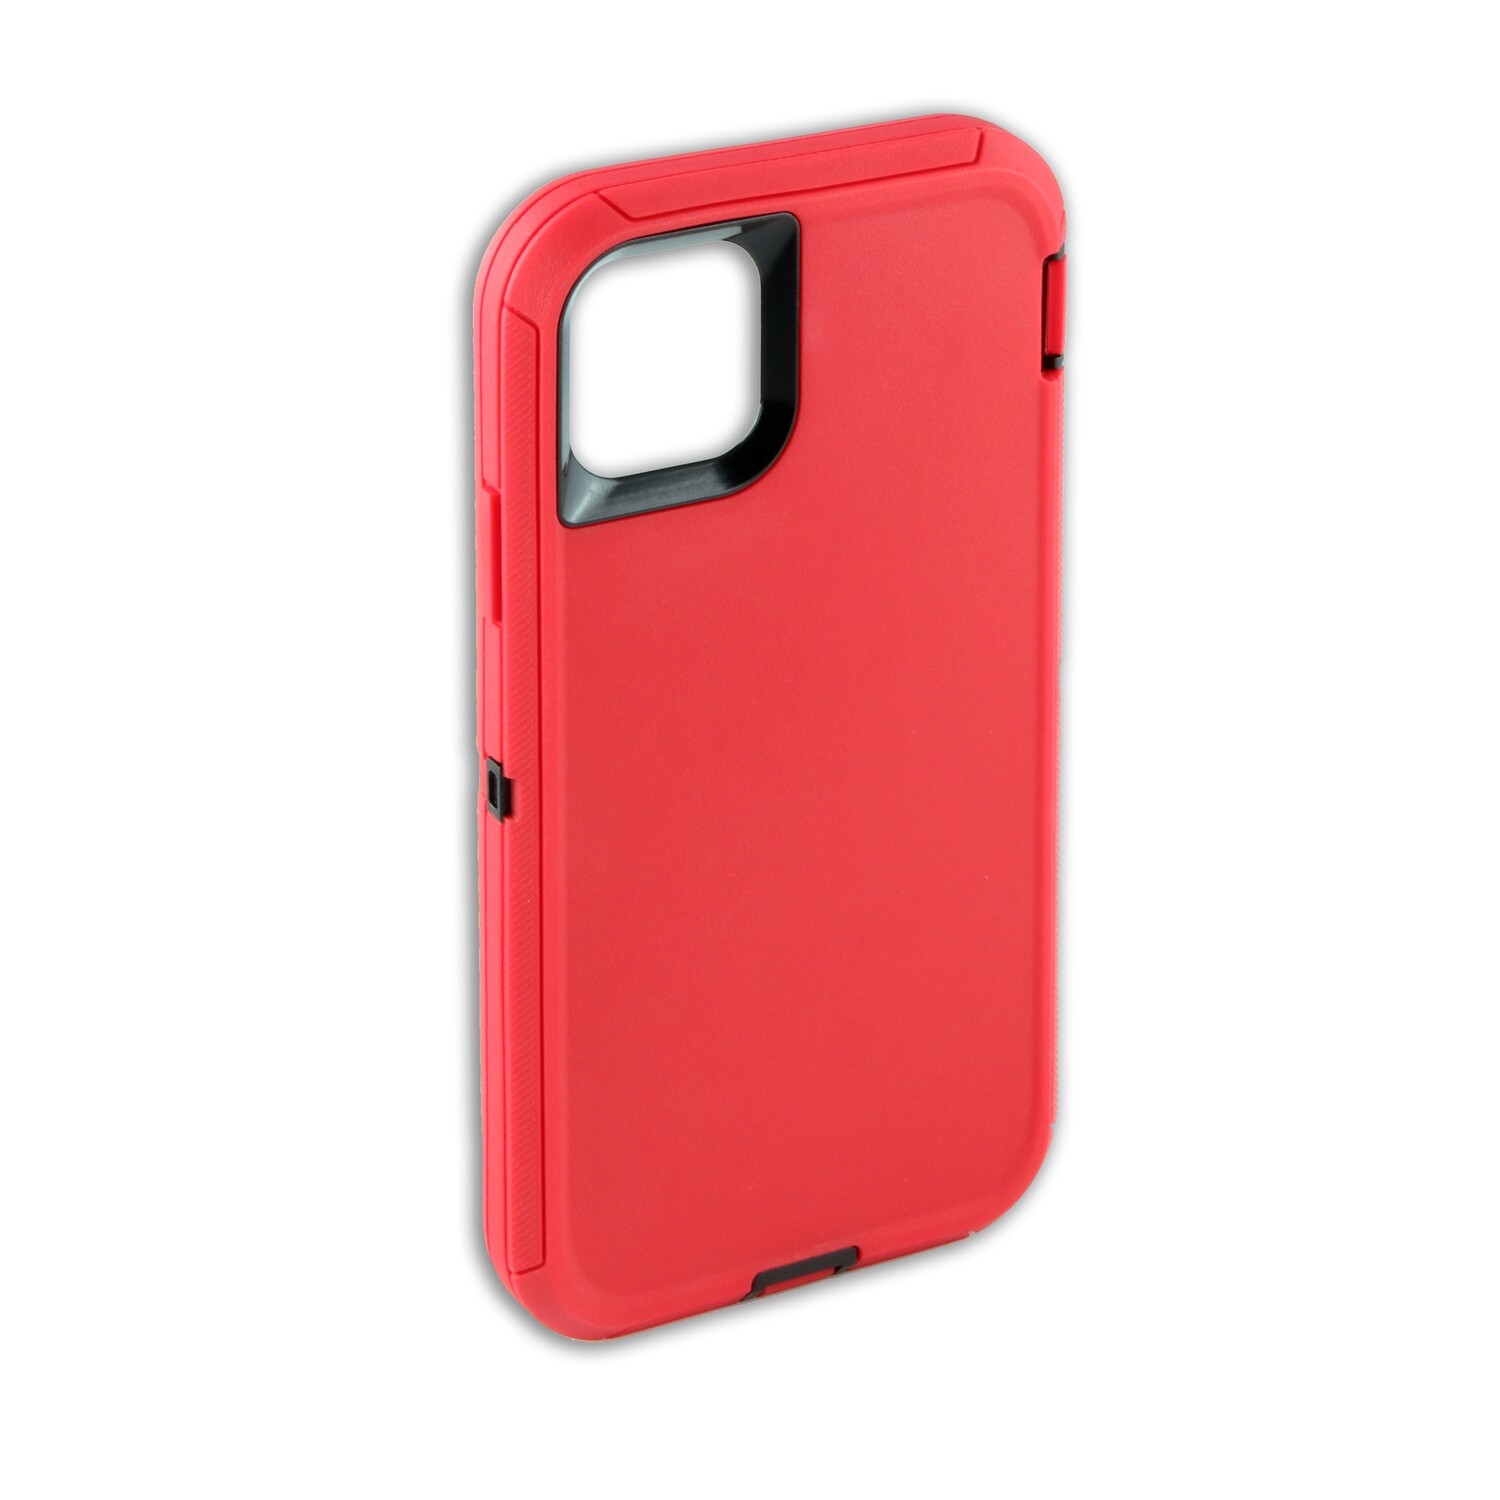 iPhone 12 / 12 Pro 6.1 Tough Guardian Robot ShockProof Case, Color: Red